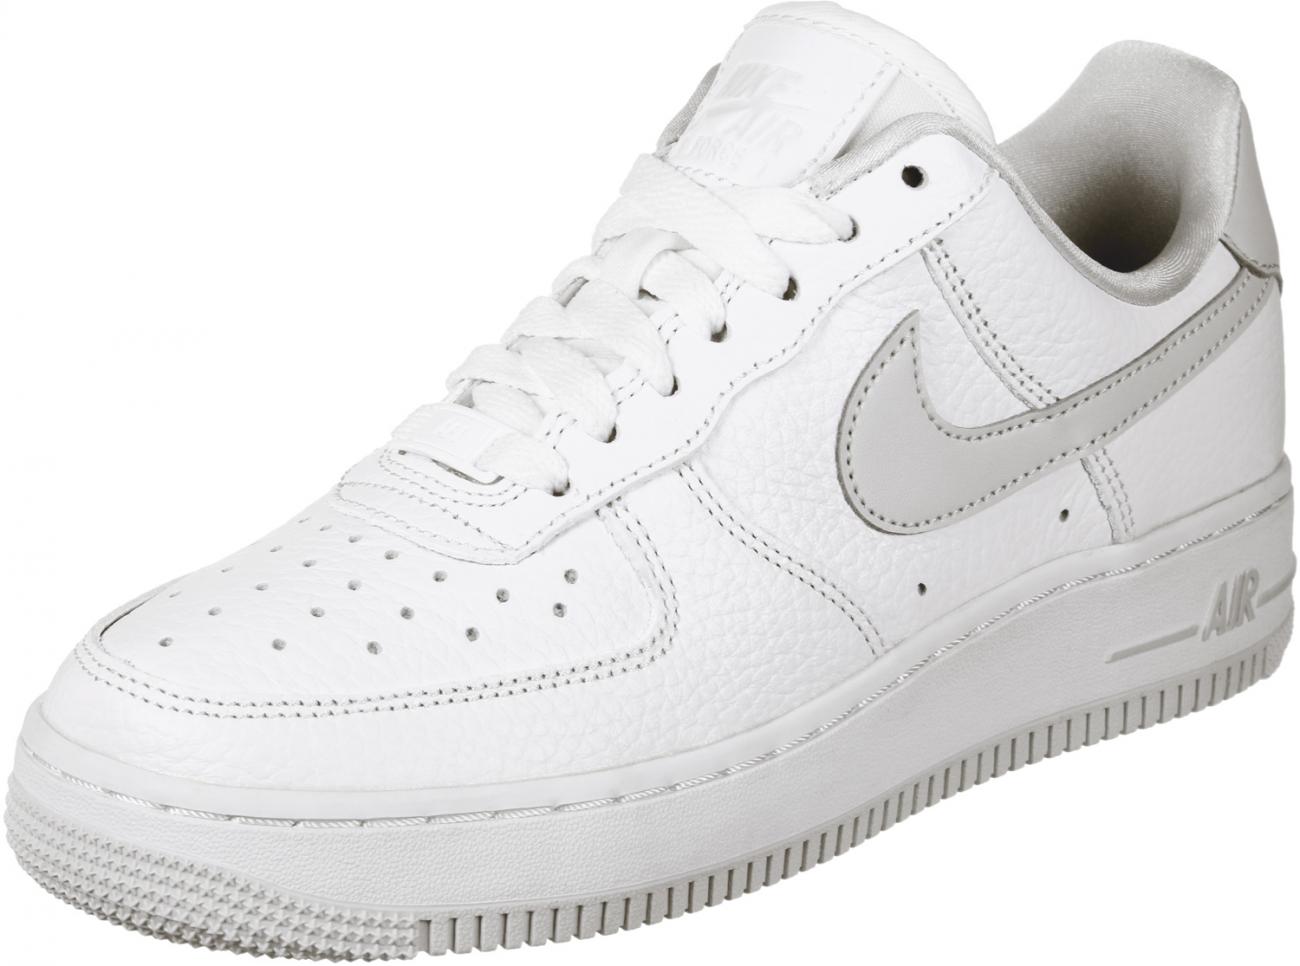 air force 1 femme blanche basse